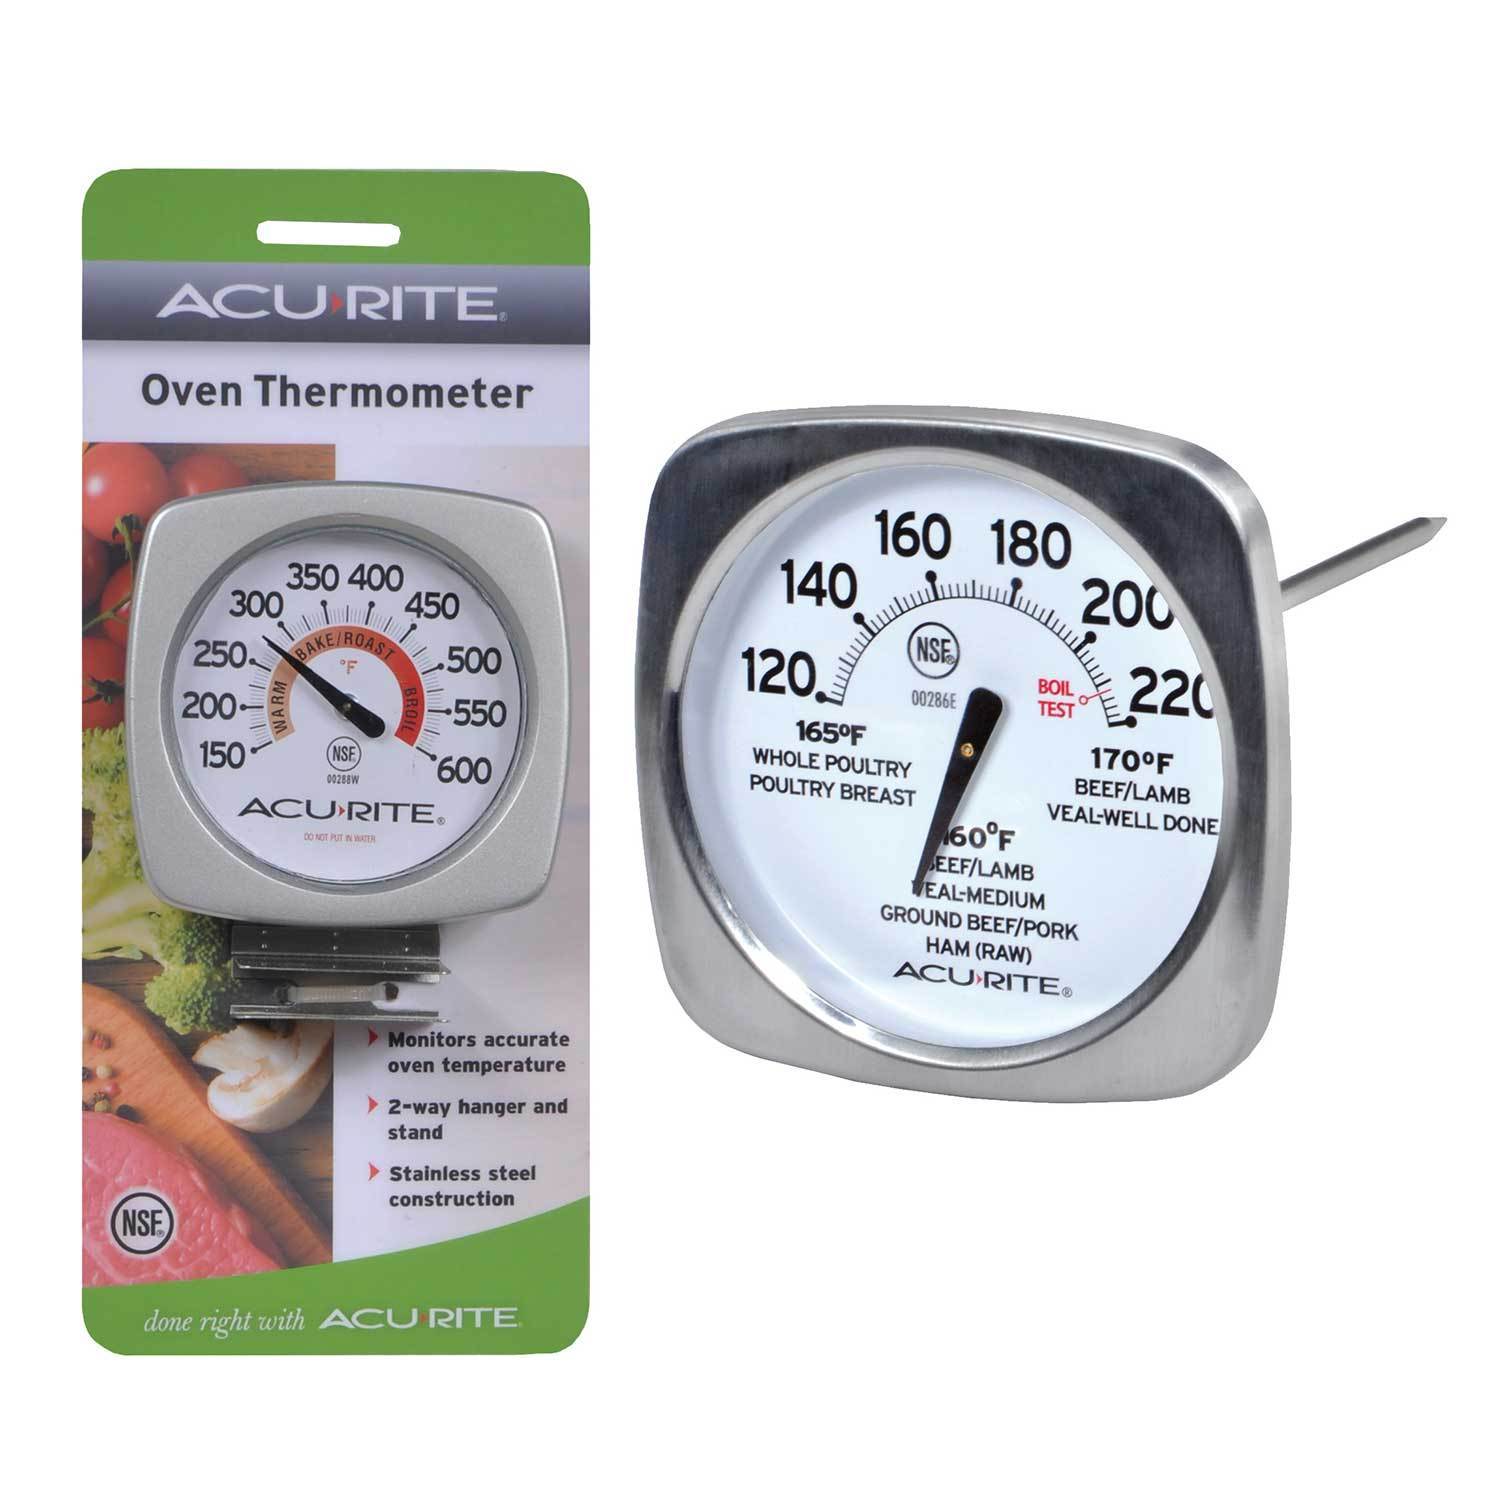 https://cdn.shopify.com/s/files/1/1416/1268/products/acurite-gourmet-meat-thermometer-30625569223.jpg?v=1613158082&width=1500